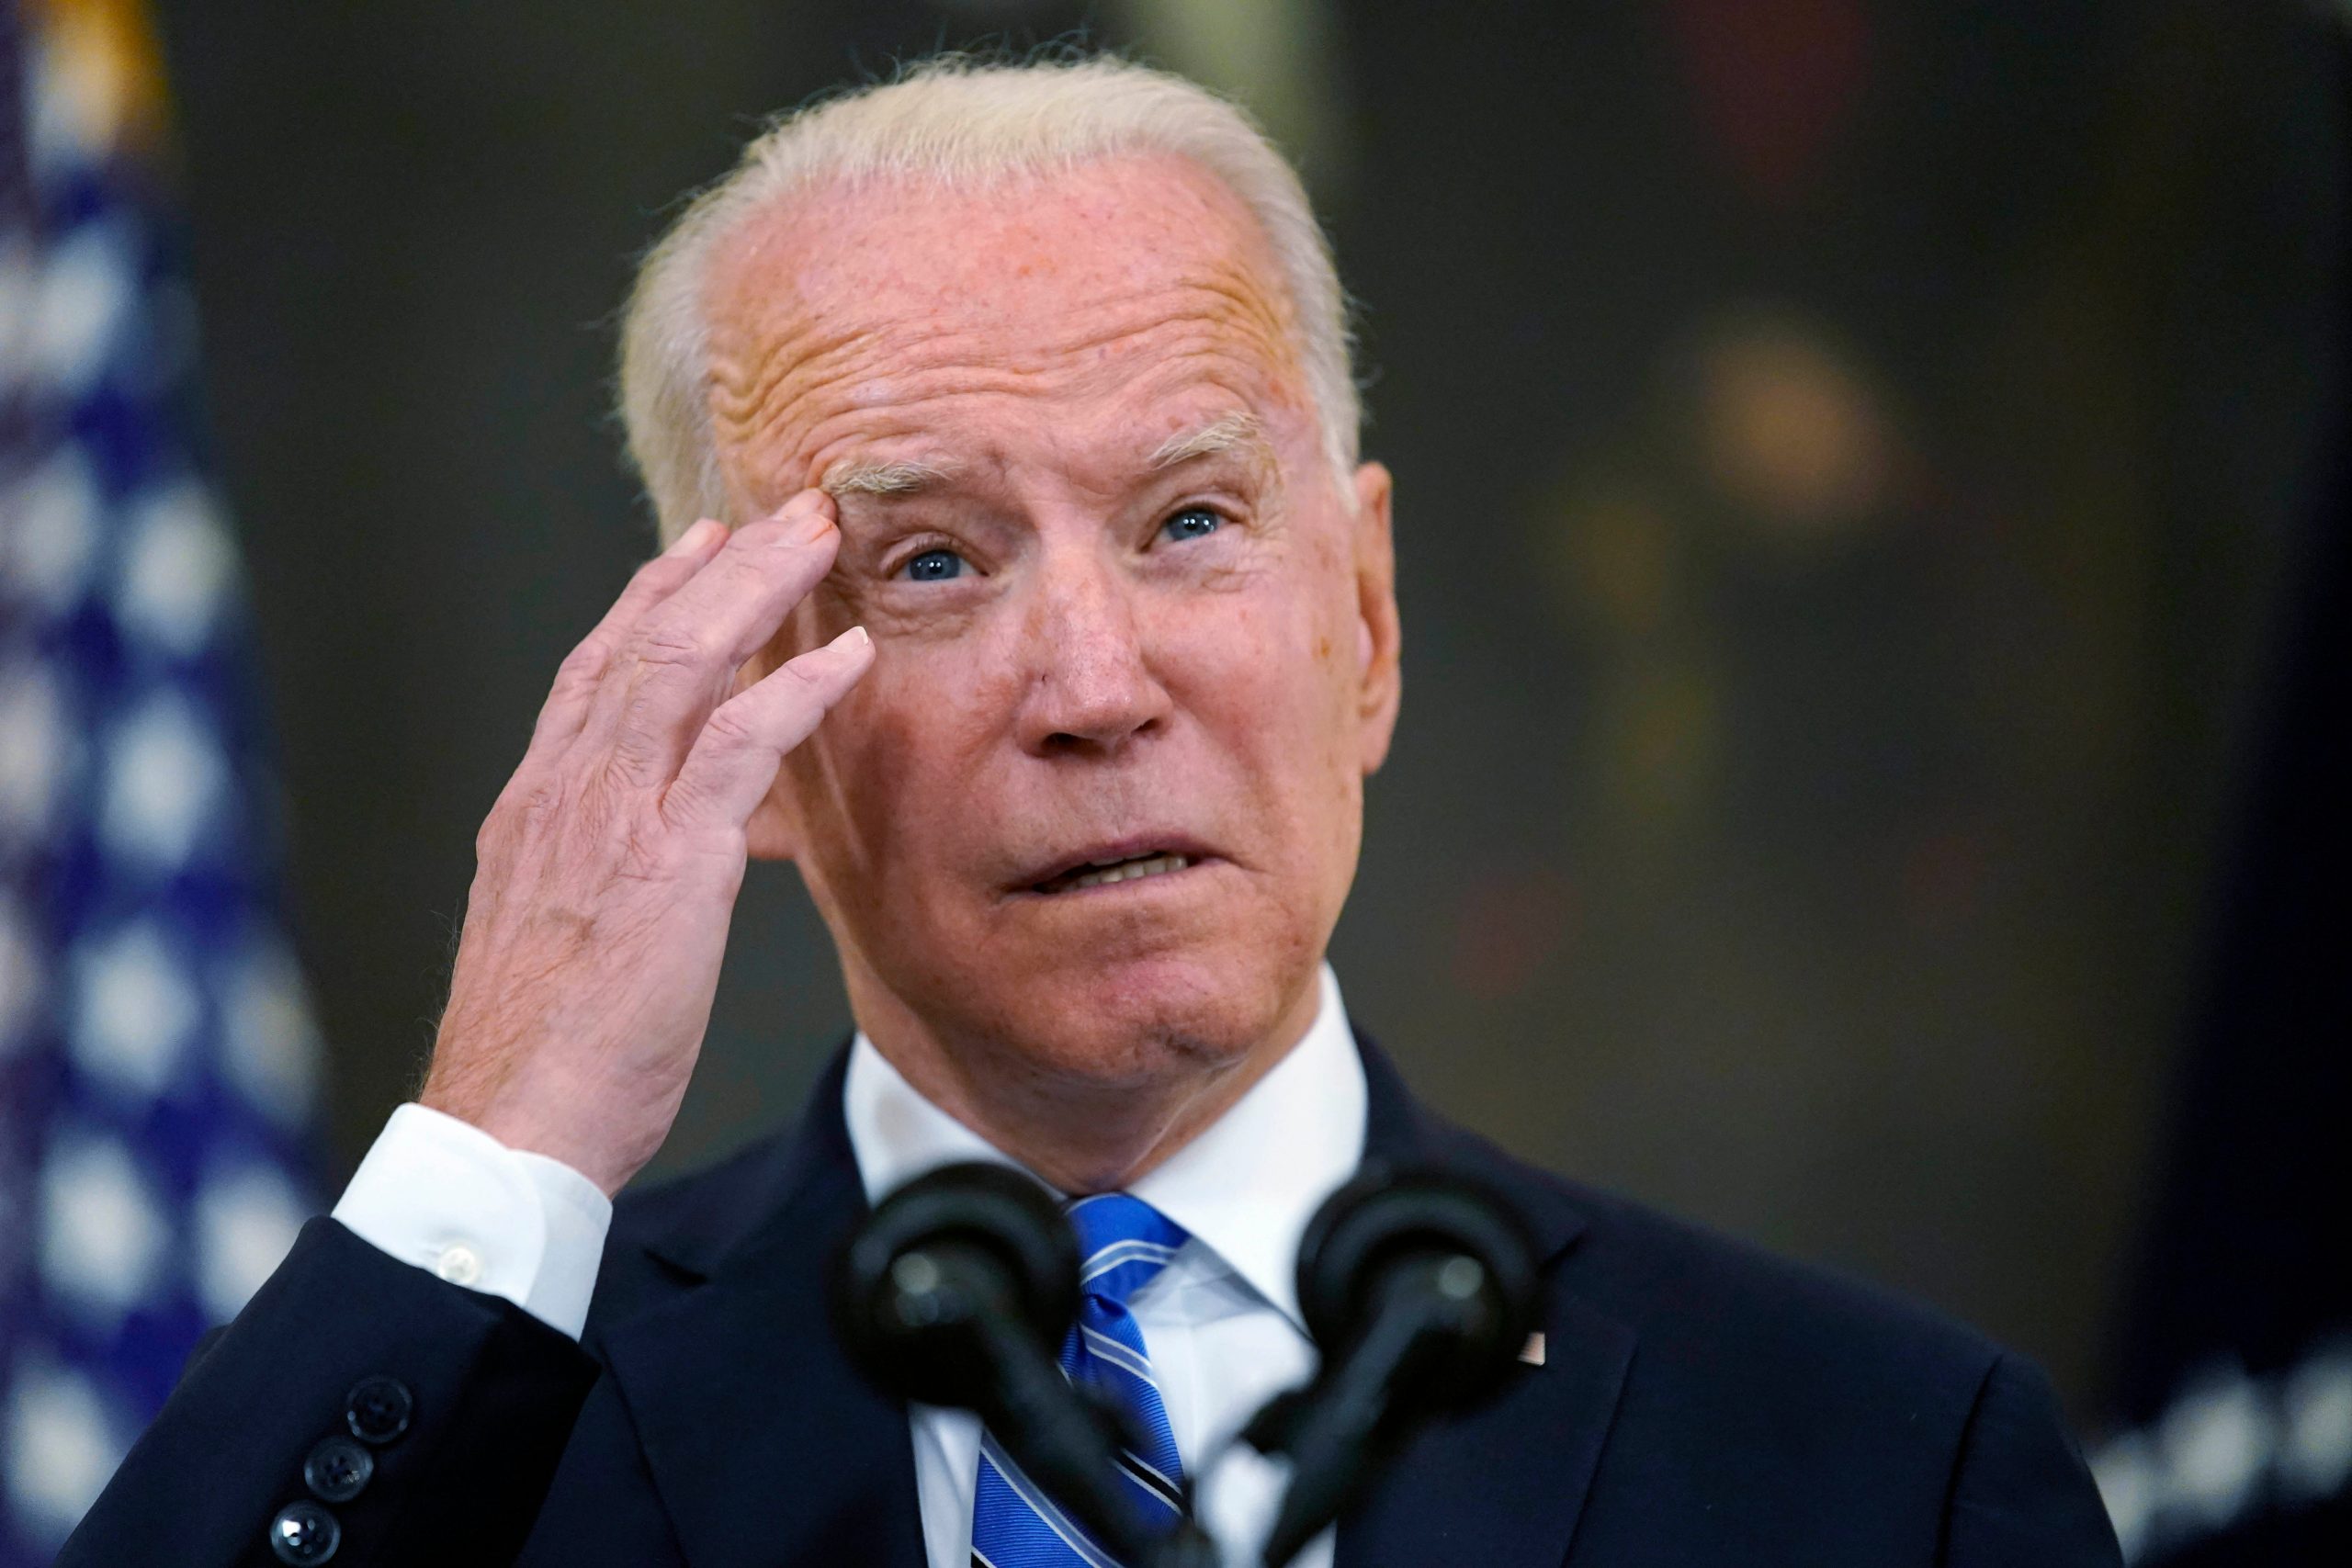 Biden seeks extension of CDCs eviction ban as millions risk being homeless